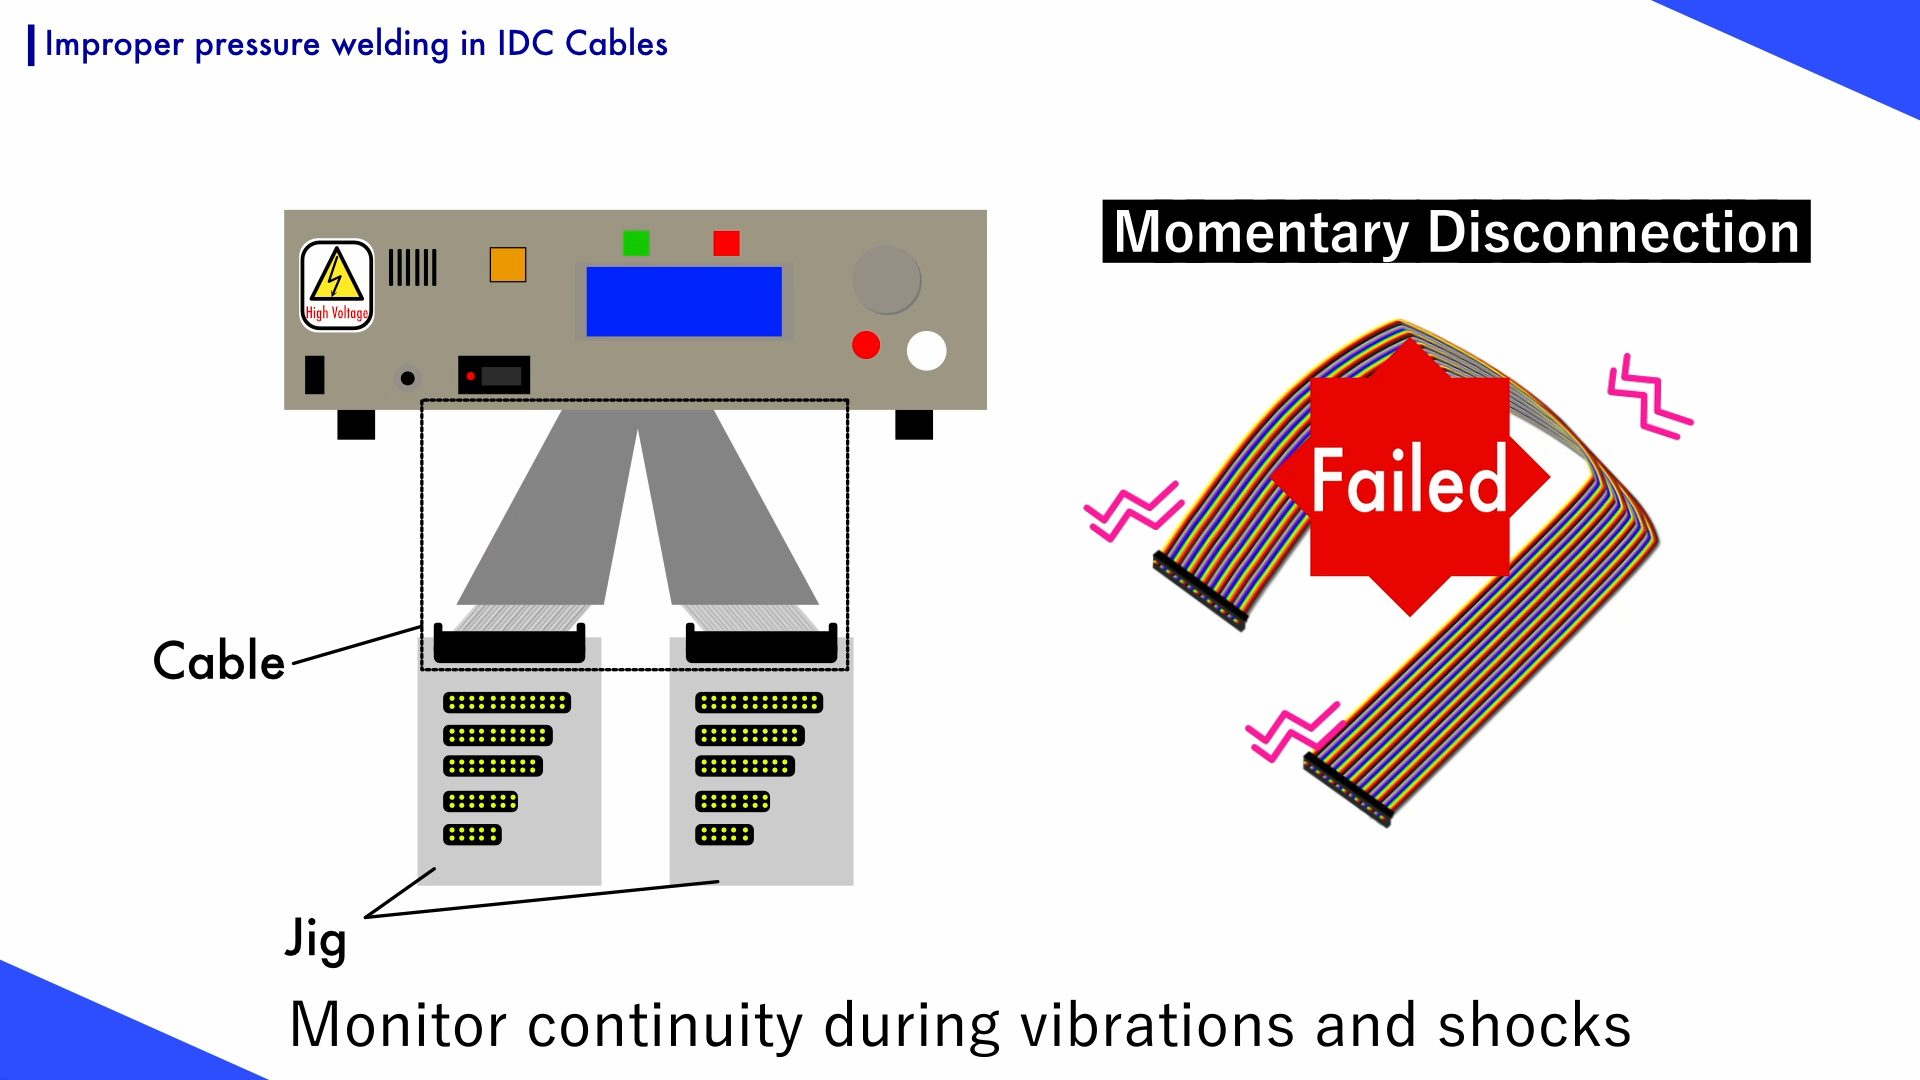 Introduction of Momentary Disconnection Testing for Improper Pressure Welding in IDC Cables